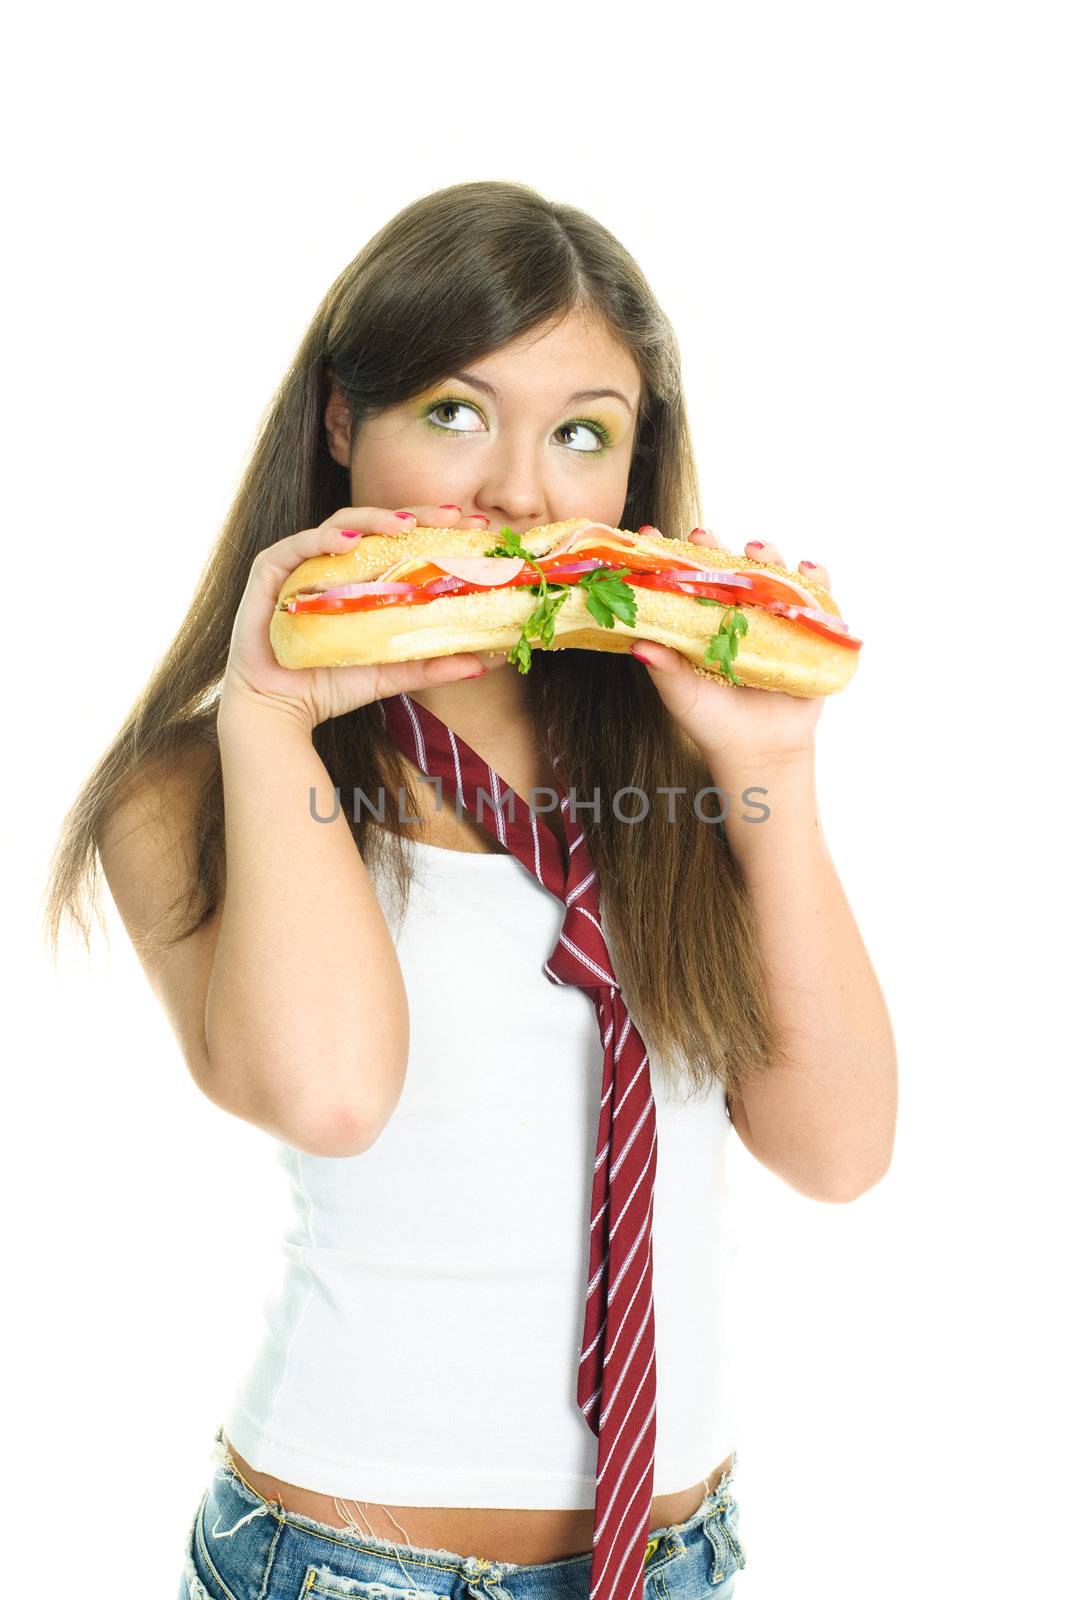 pretty young girl eating a huge sandwich, isolated against white background